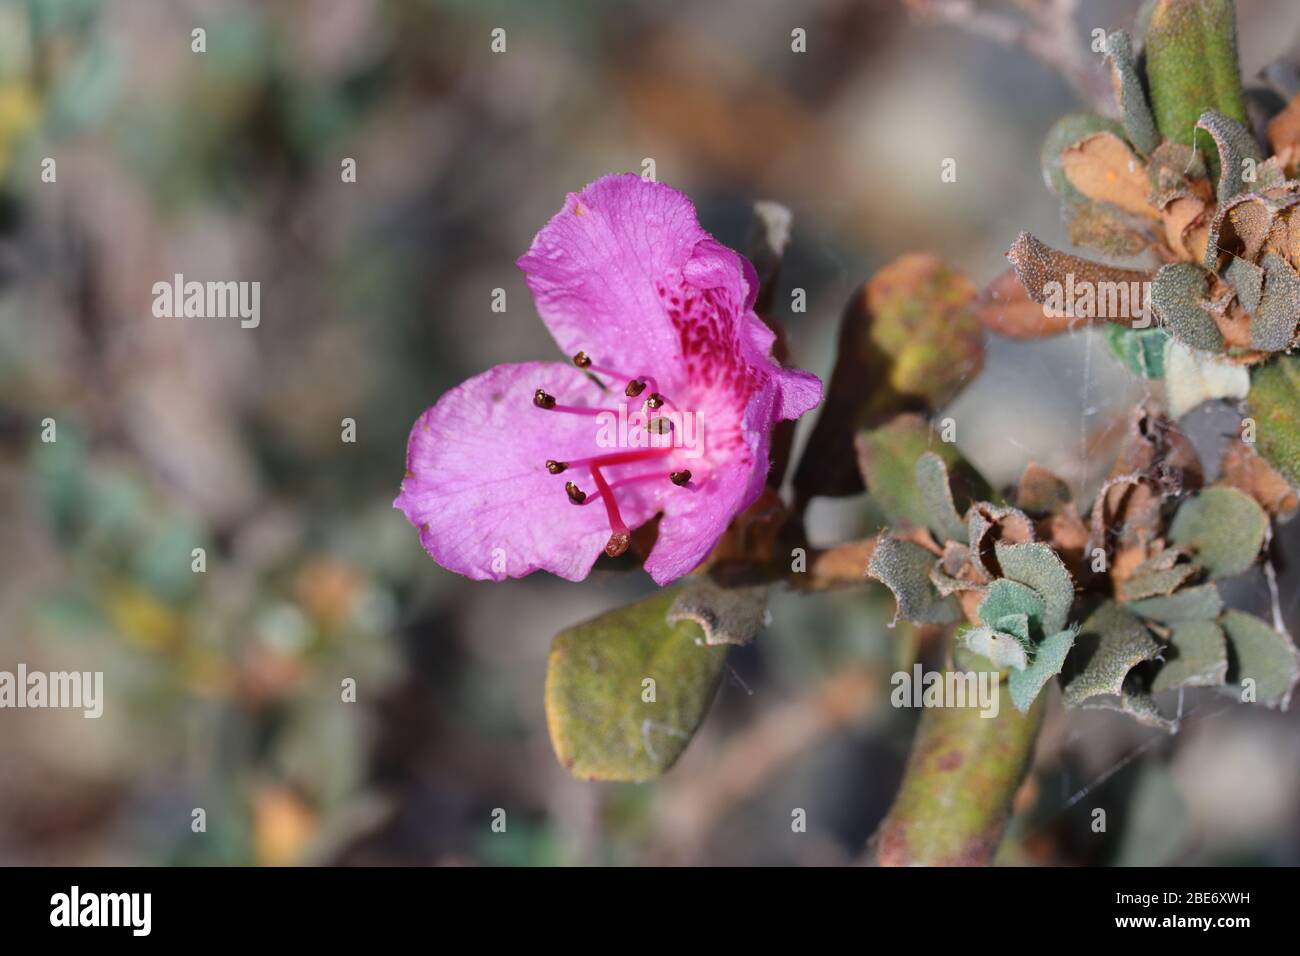 Rhododendron calostrotum: Widely funnel shaped or rotate, pink, rose-crimson, purple, magenta often spotted darker on upper lobes. Stock Photo